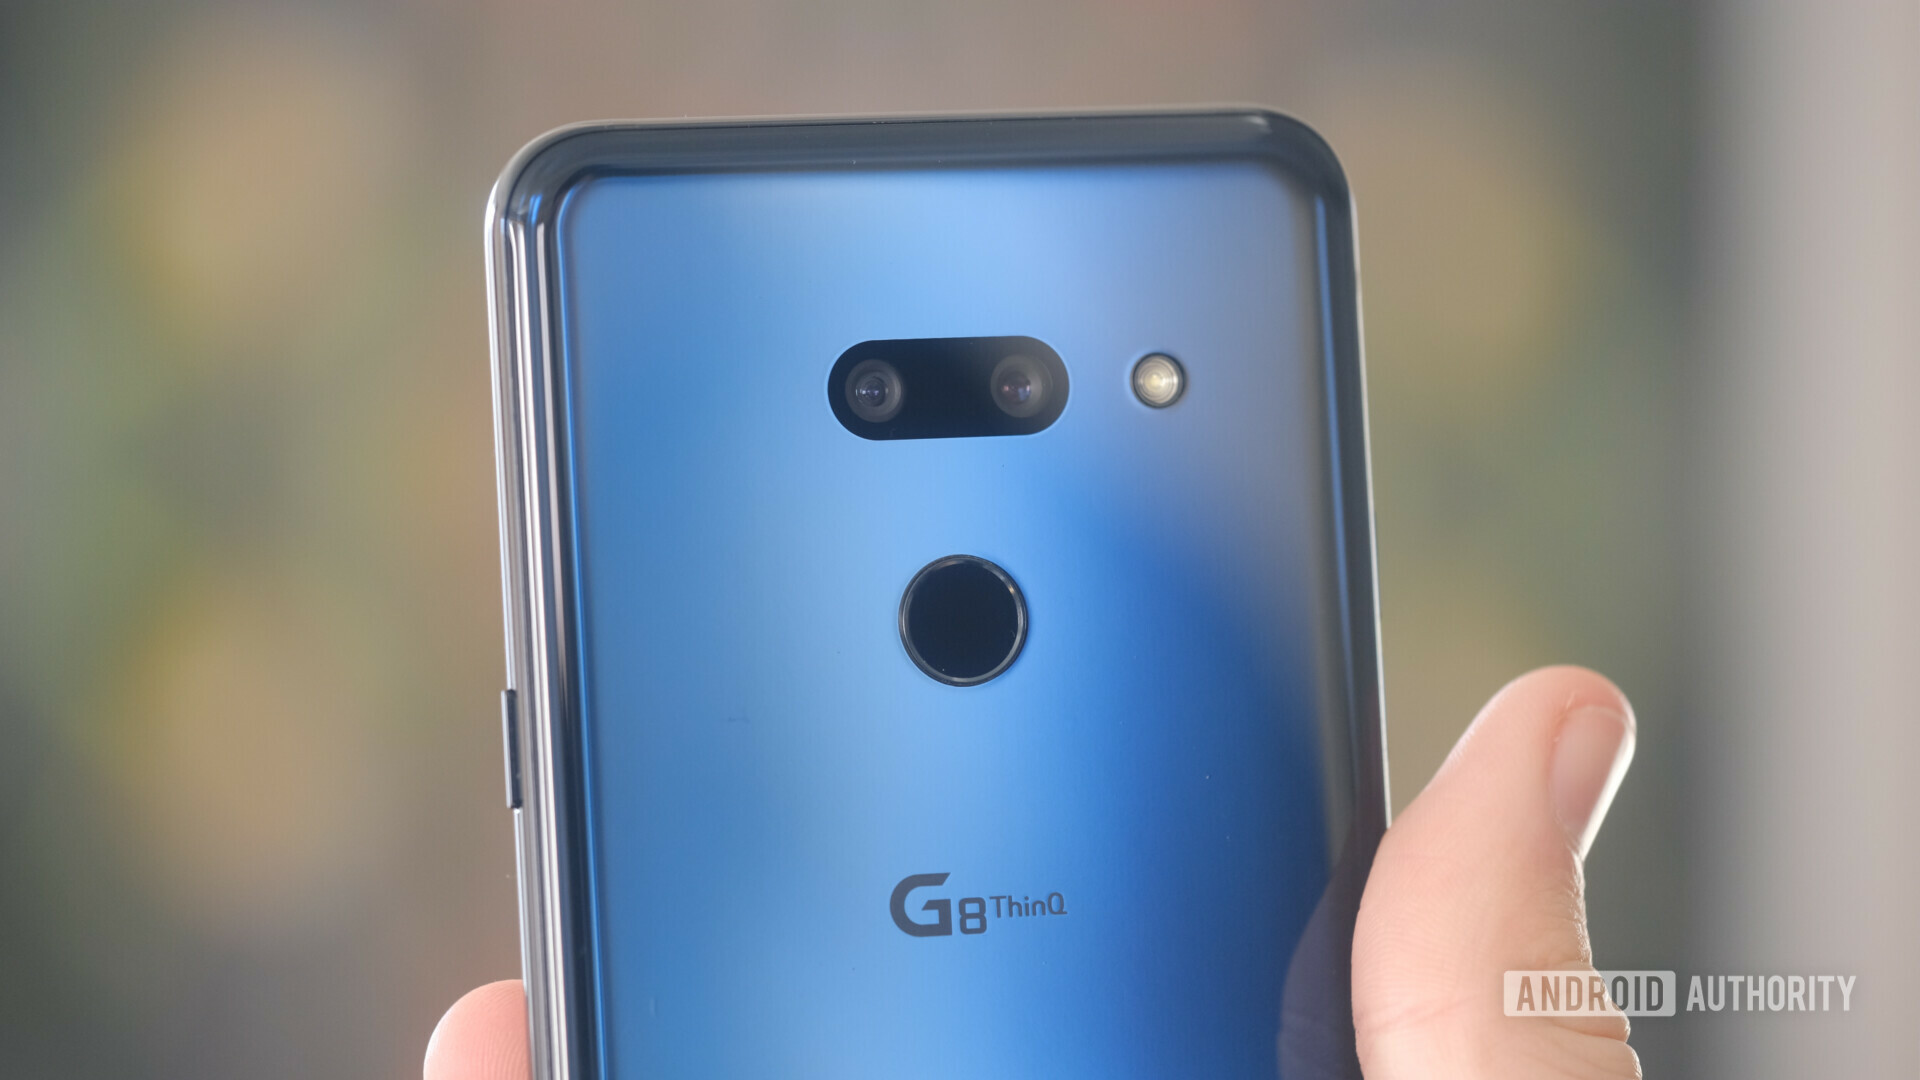 Backside photo of the LG G8 ThinQ showing the dual cameras.